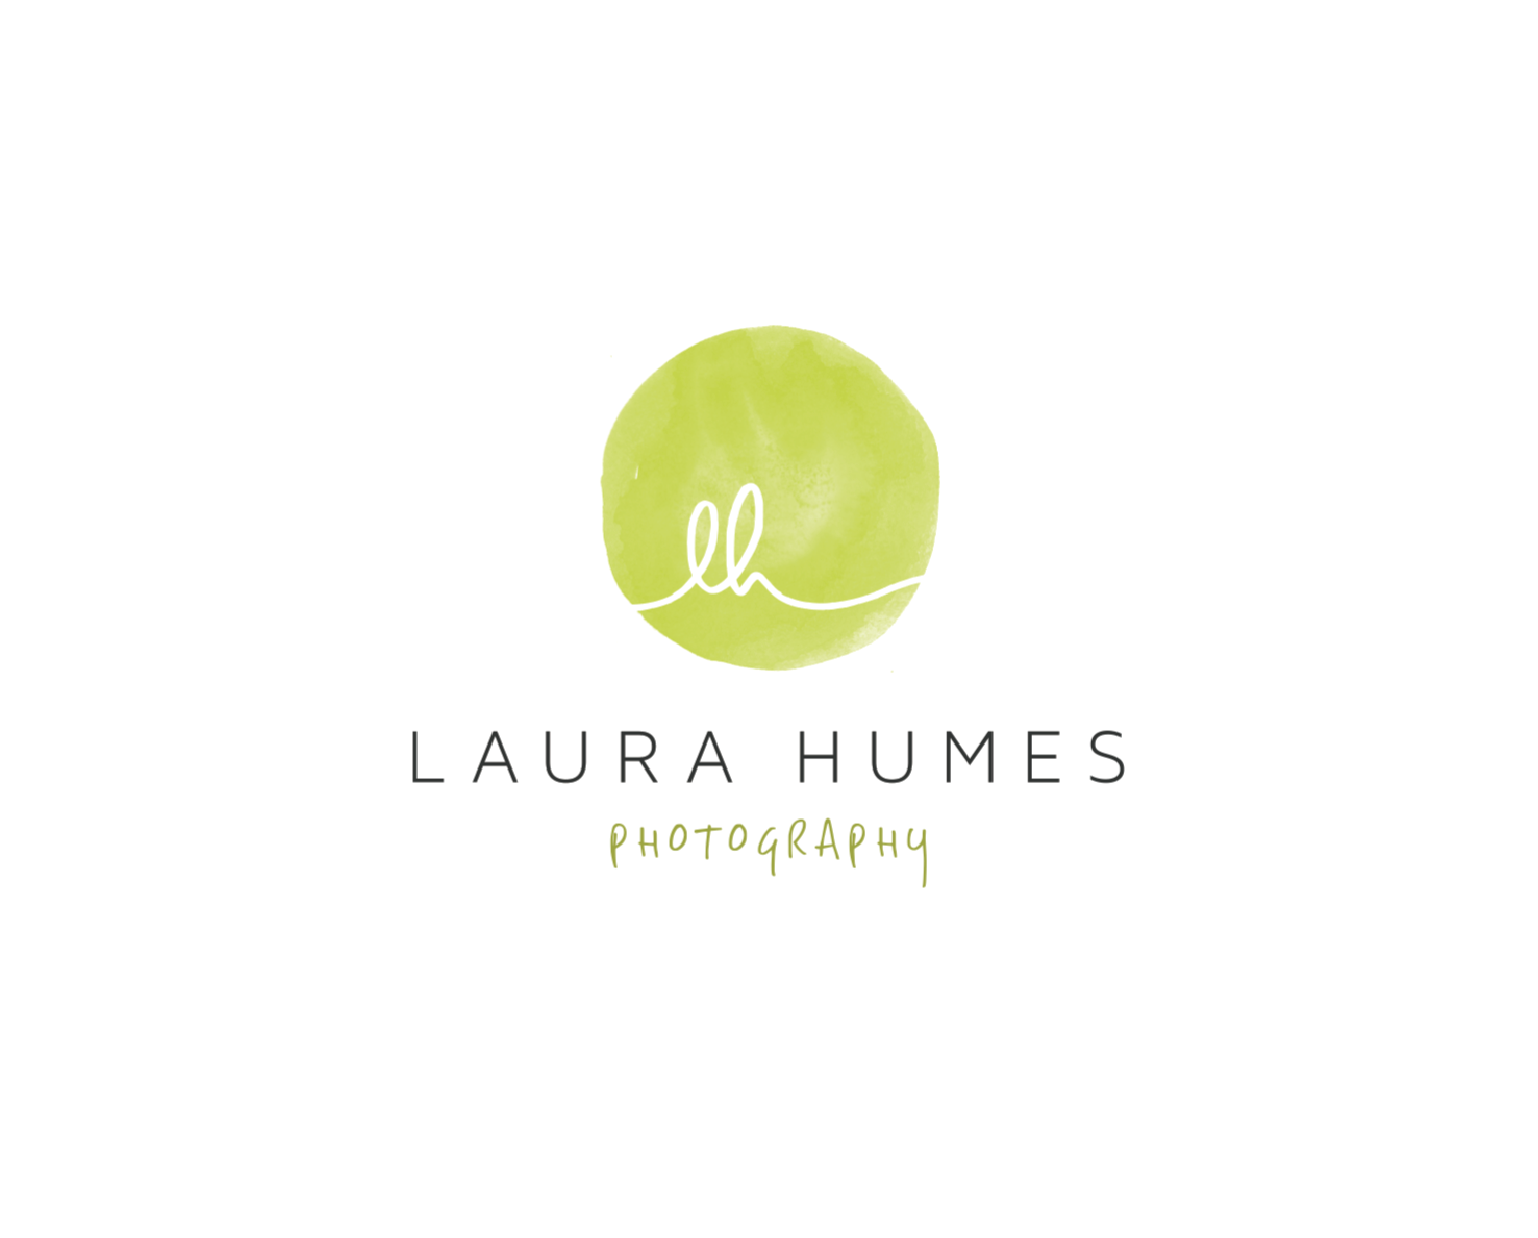 Laura Humes Photography - Brand Development and Logo Design